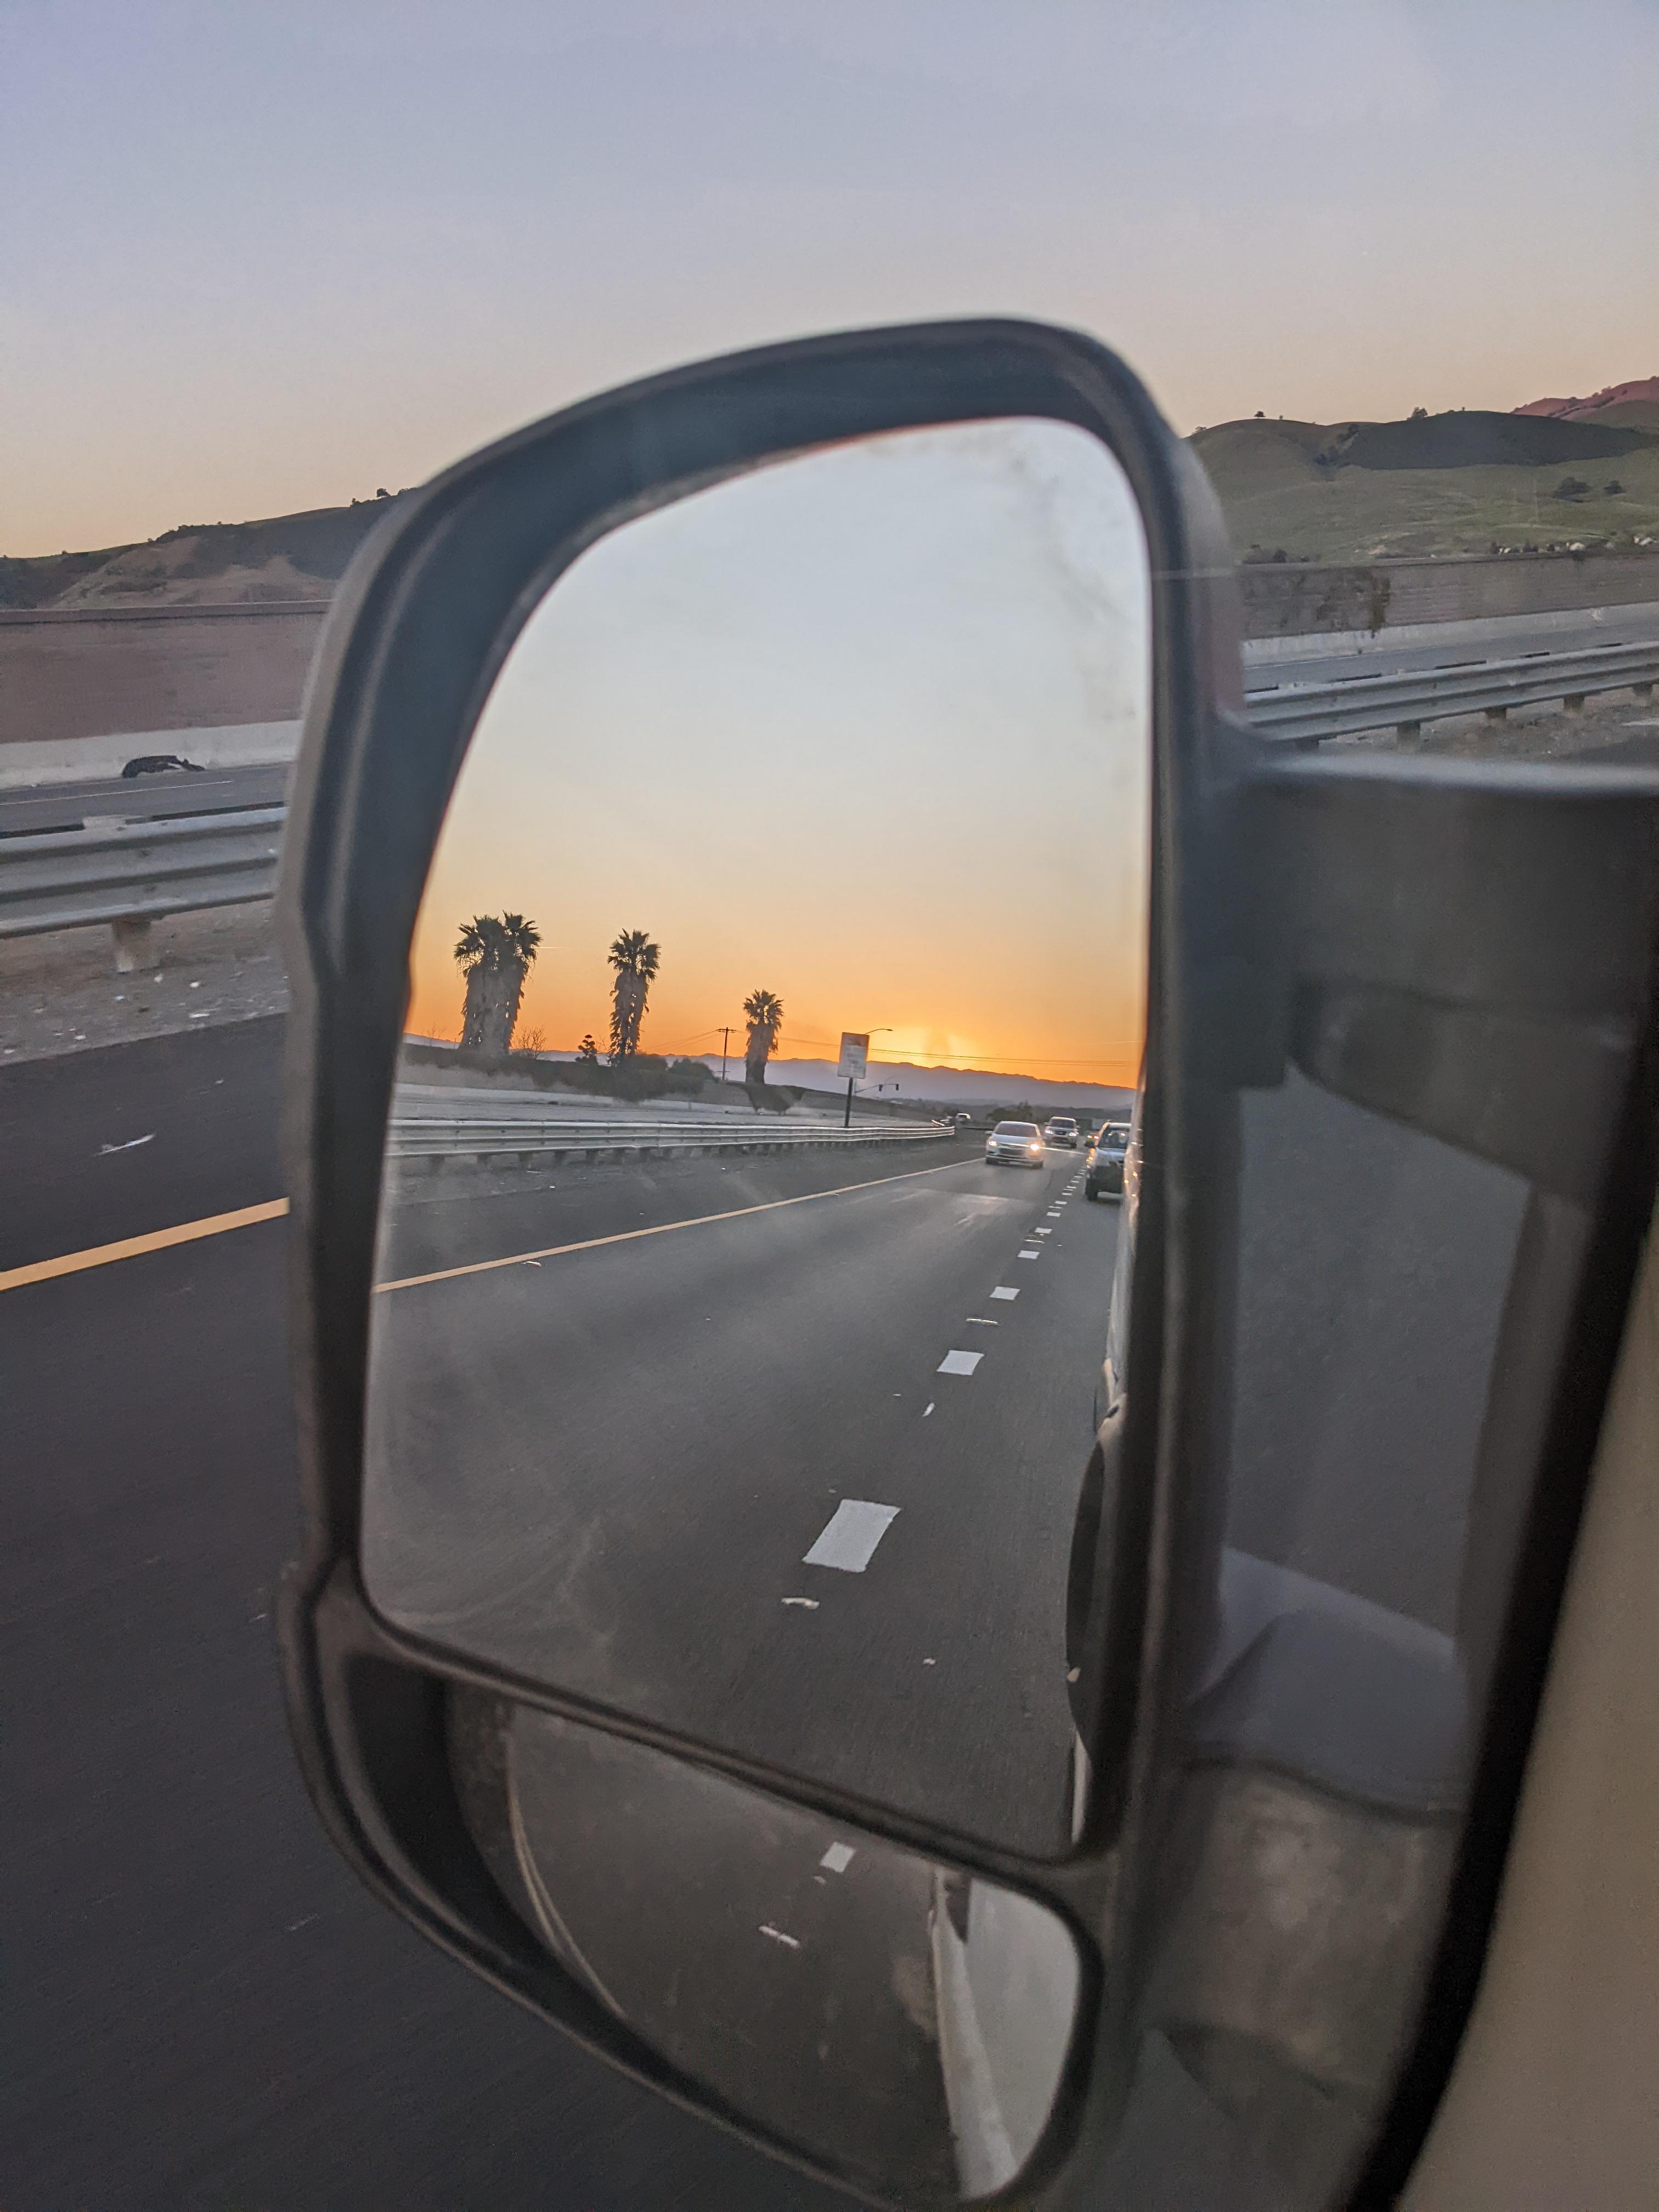 [image of a van mirror reflecting a vivid sunset with a palm tree lined highway]